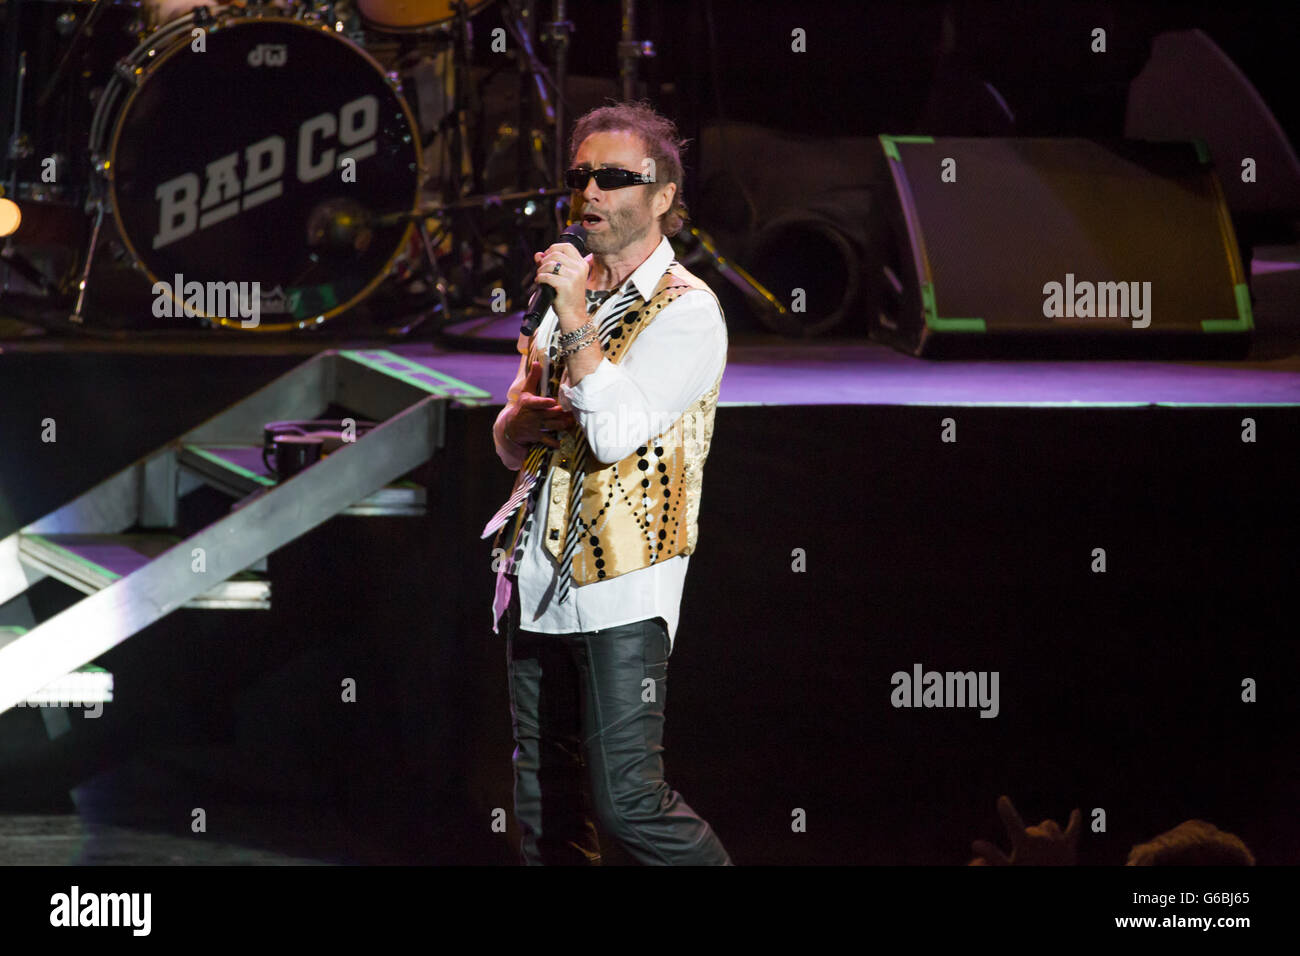 Clarkston, Michigan, USA. 22nd June, 2016. PAUL RODGERS of BAD COMPANY performing on the ''One Hell Of A Night Tour'' at DTE Energy Music Theatre in Clarkston, MI on June 22nd 2016 © Marc Nader/ZUMA Wire/Alamy Live News Stock Photo